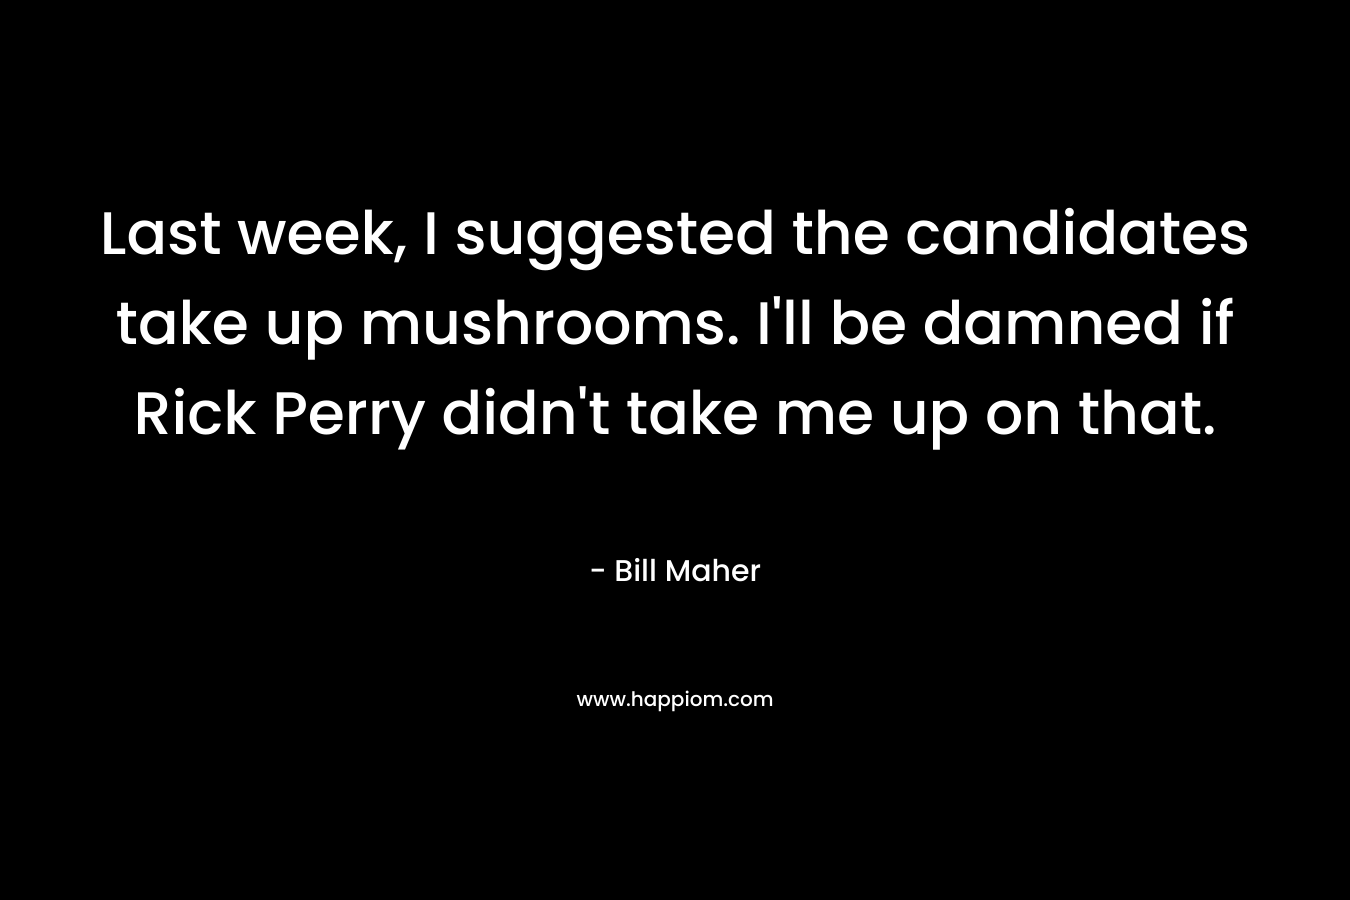 Last week, I suggested the candidates take up mushrooms. I'll be damned if Rick Perry didn't take me up on that.